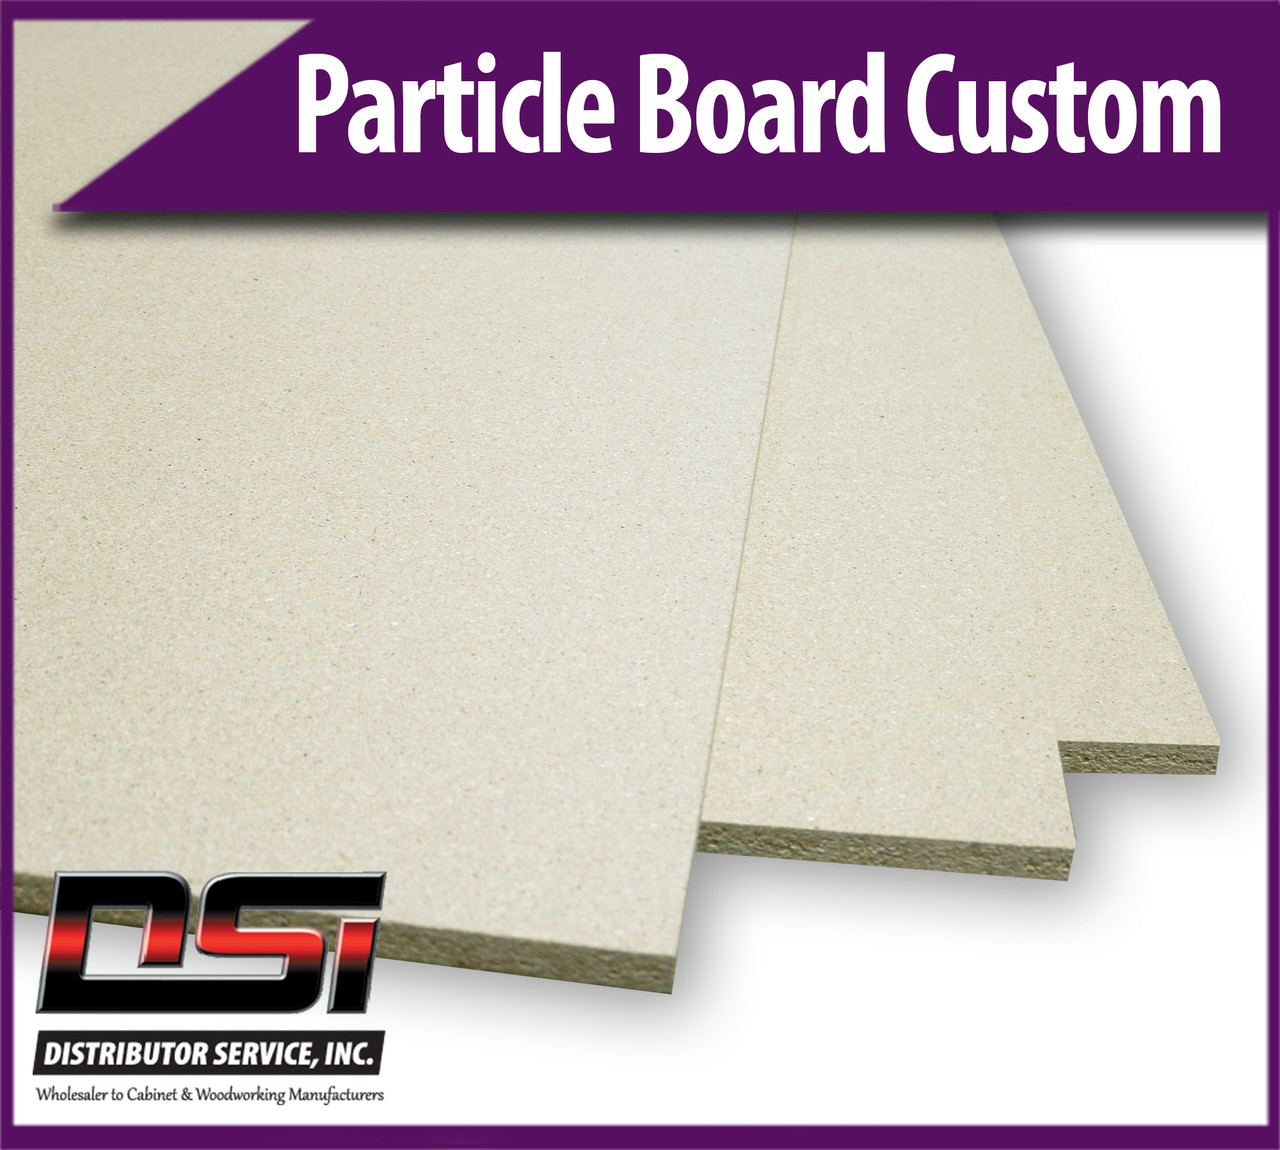 Particle Board Core Custom 3/4" x 49" x 97" Industrial Particleboard Panels